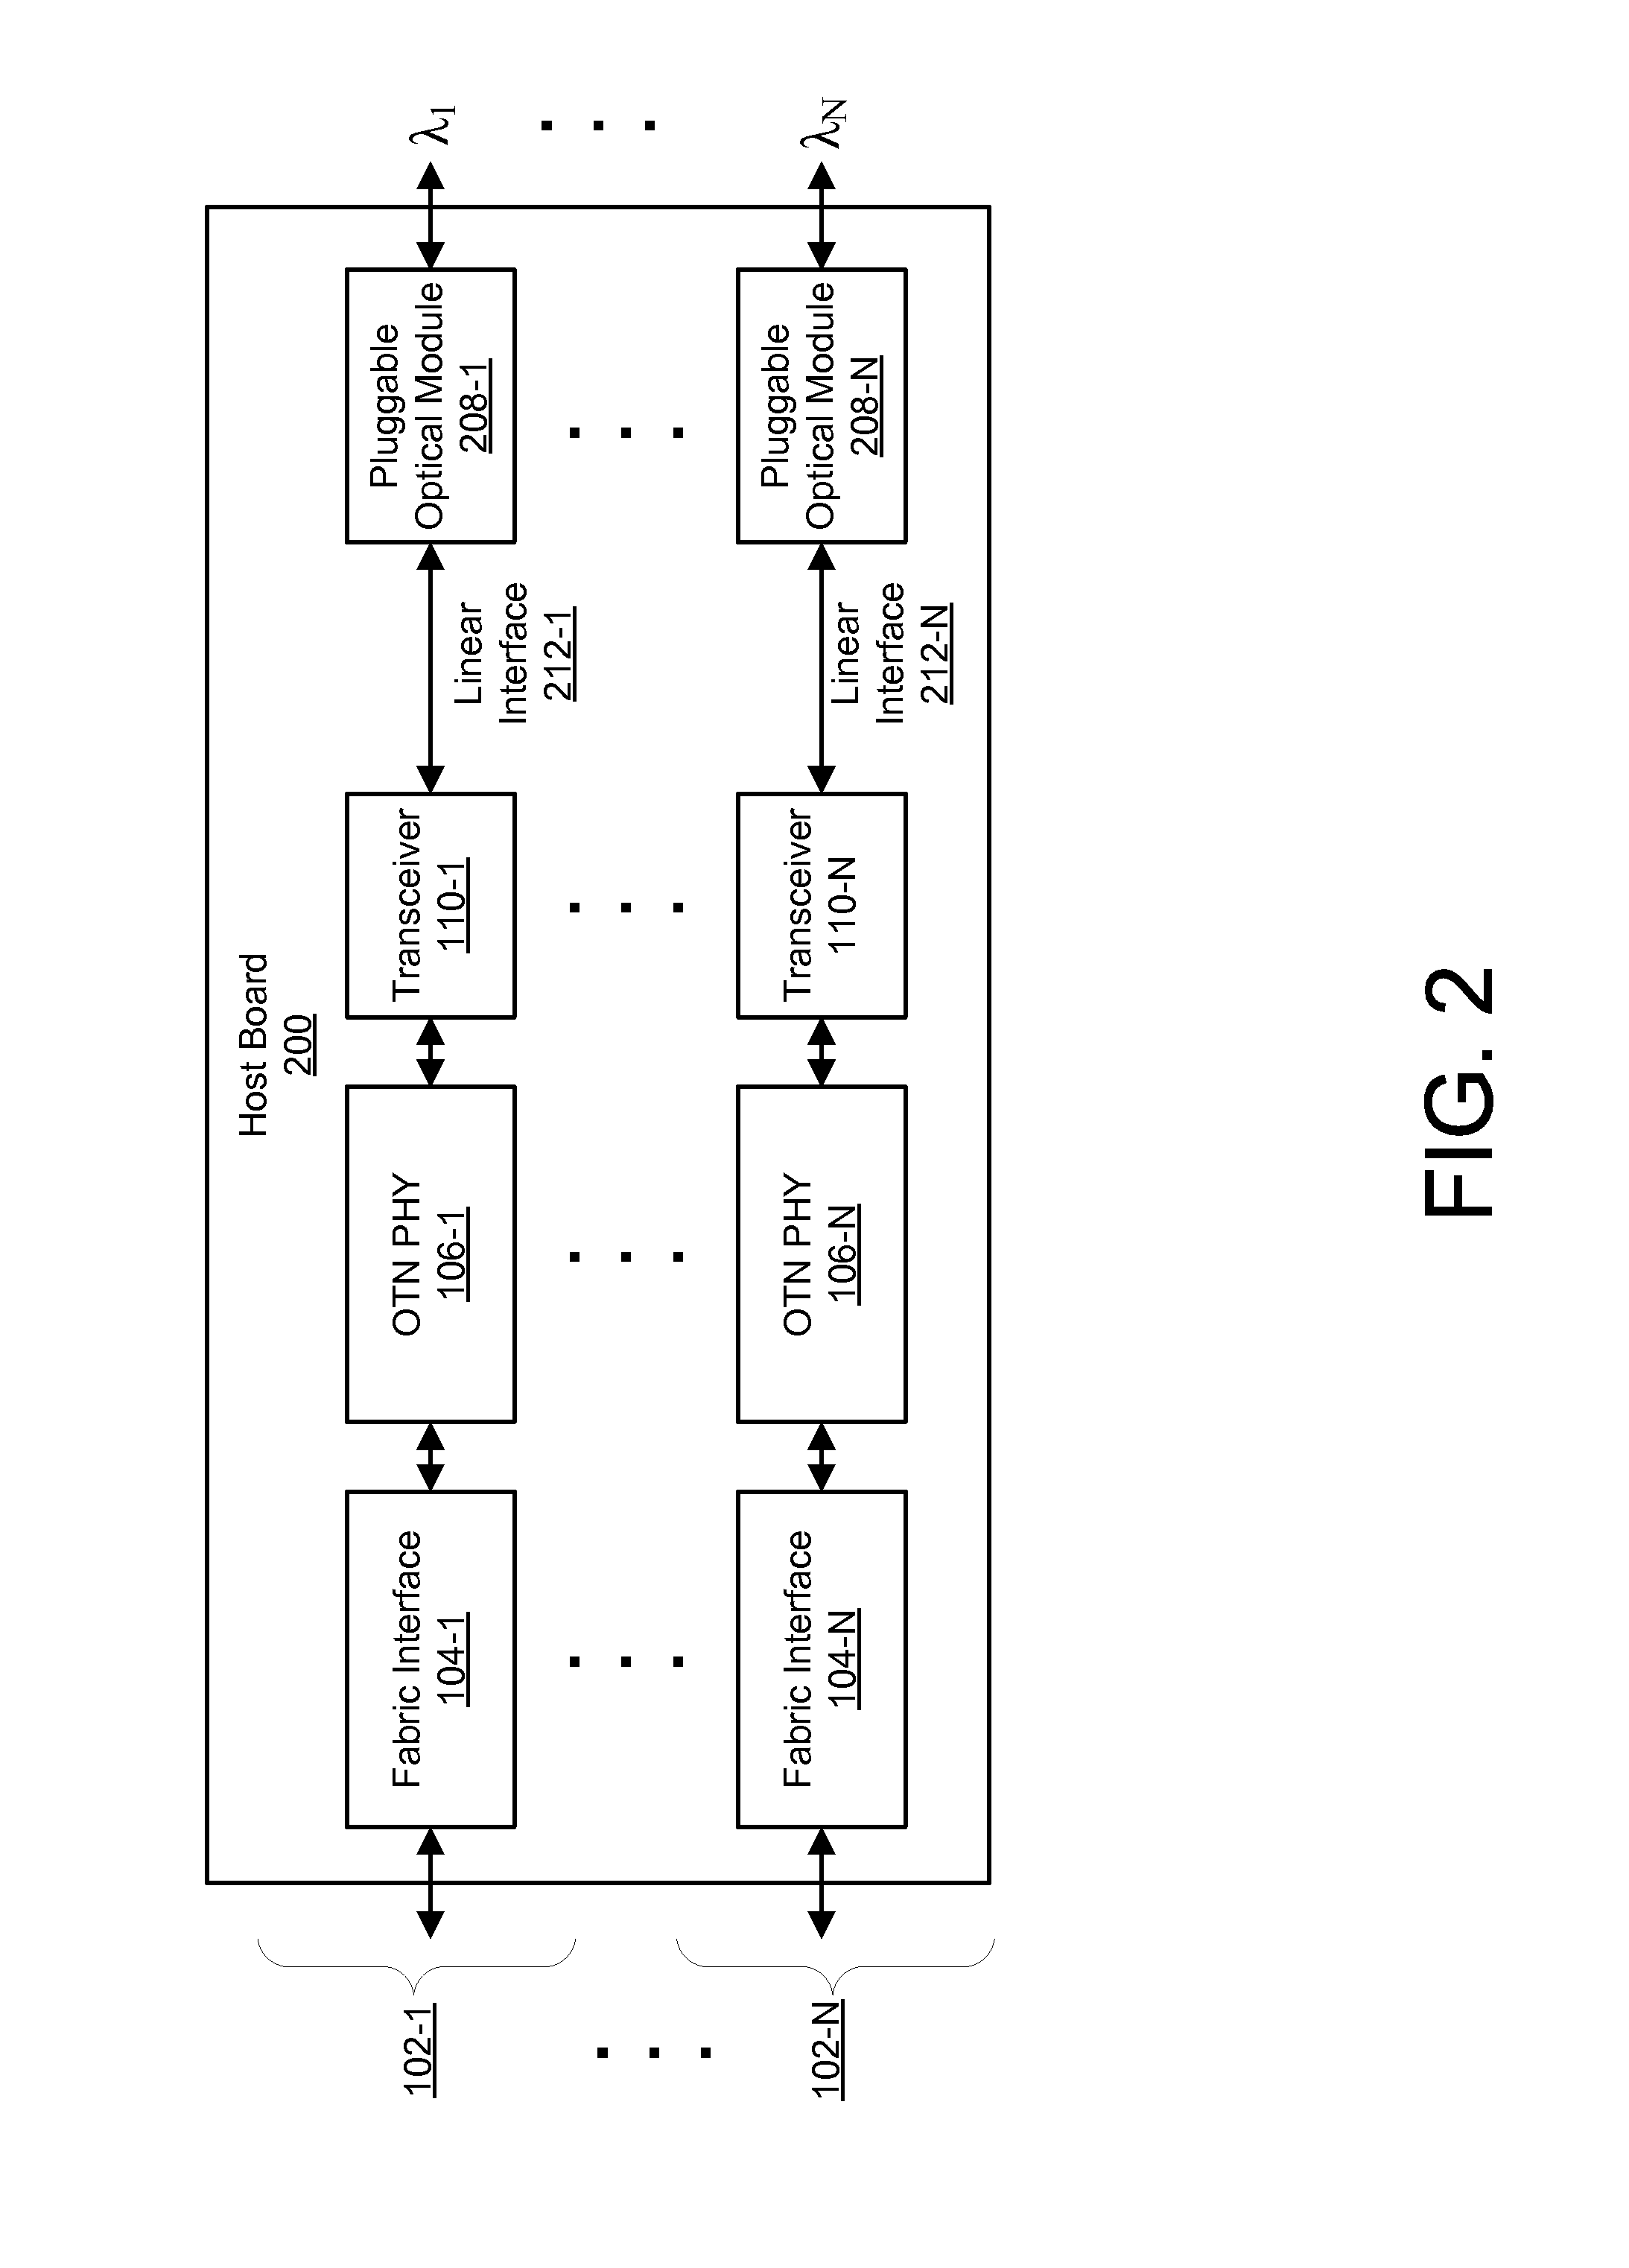 Coherent optical transceiver with programmable application modes